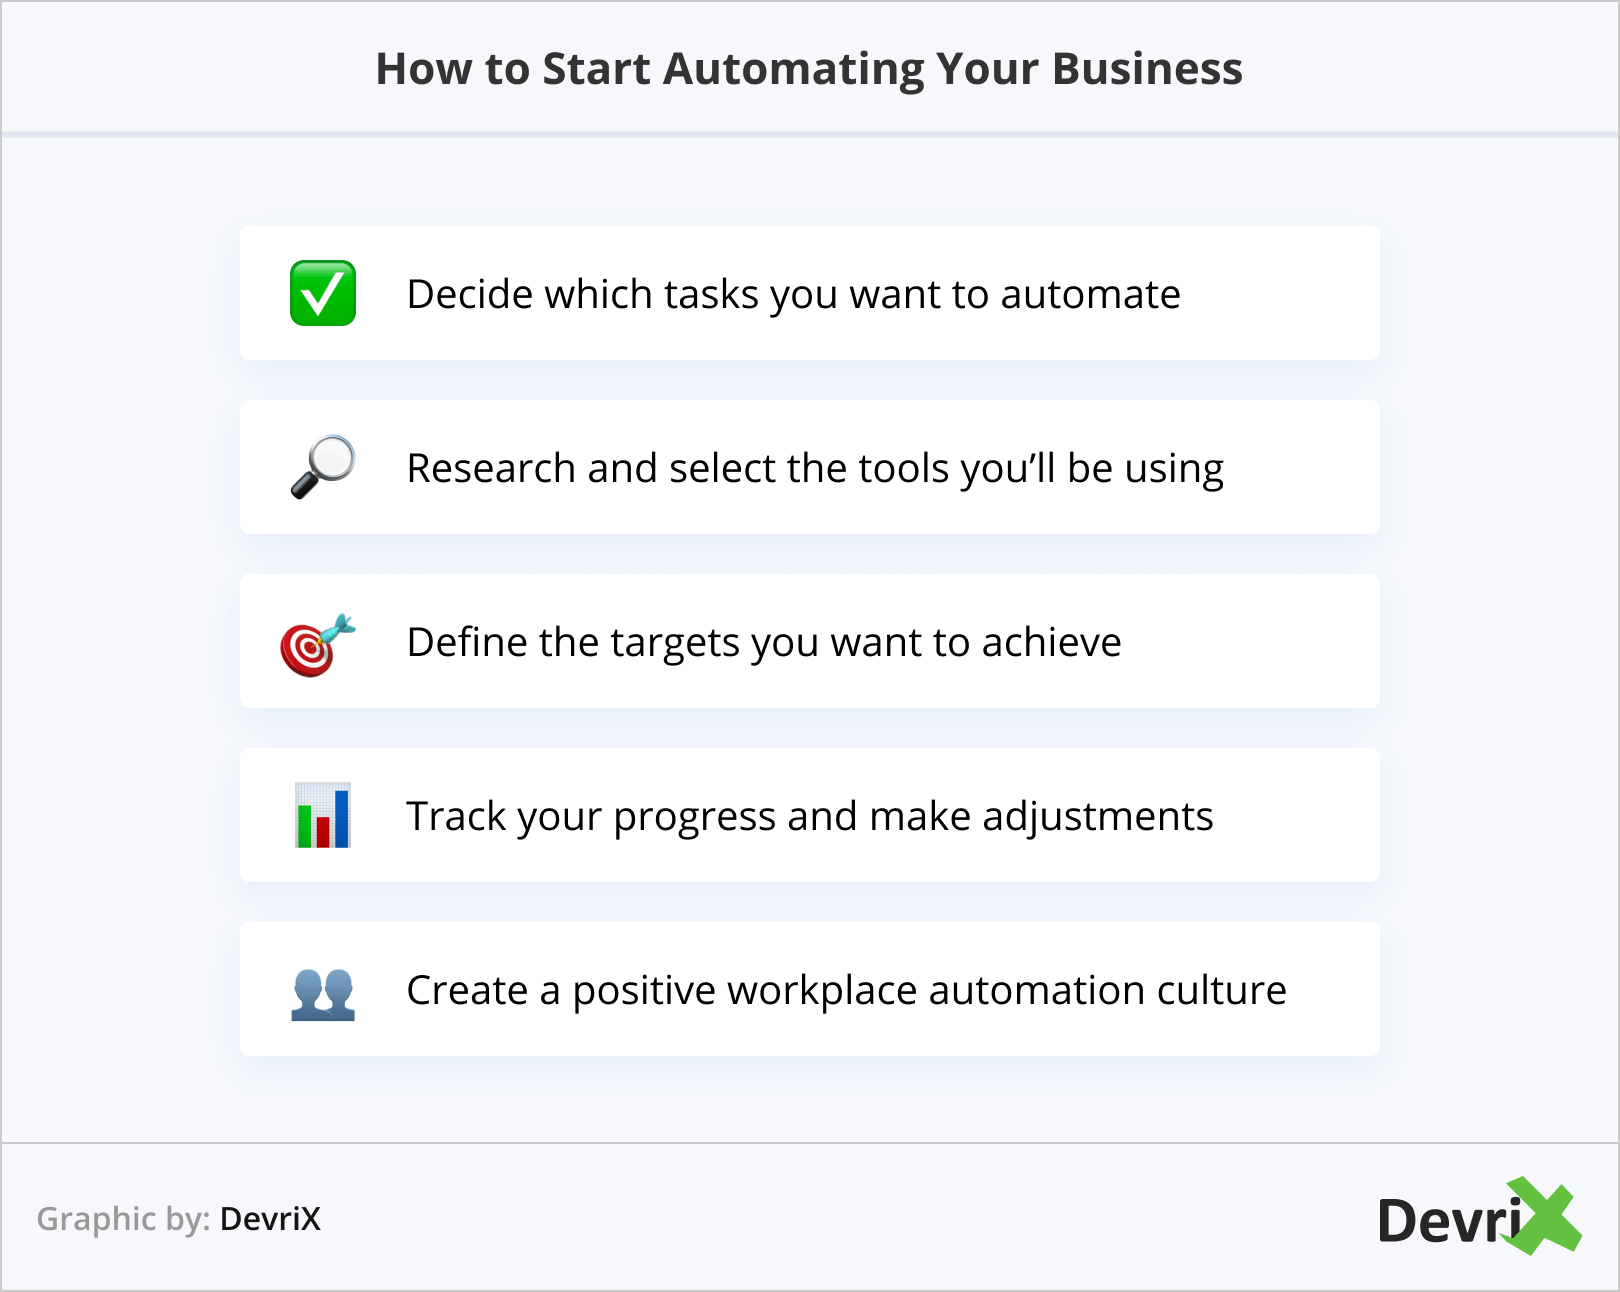 How to Start Automating Your Business